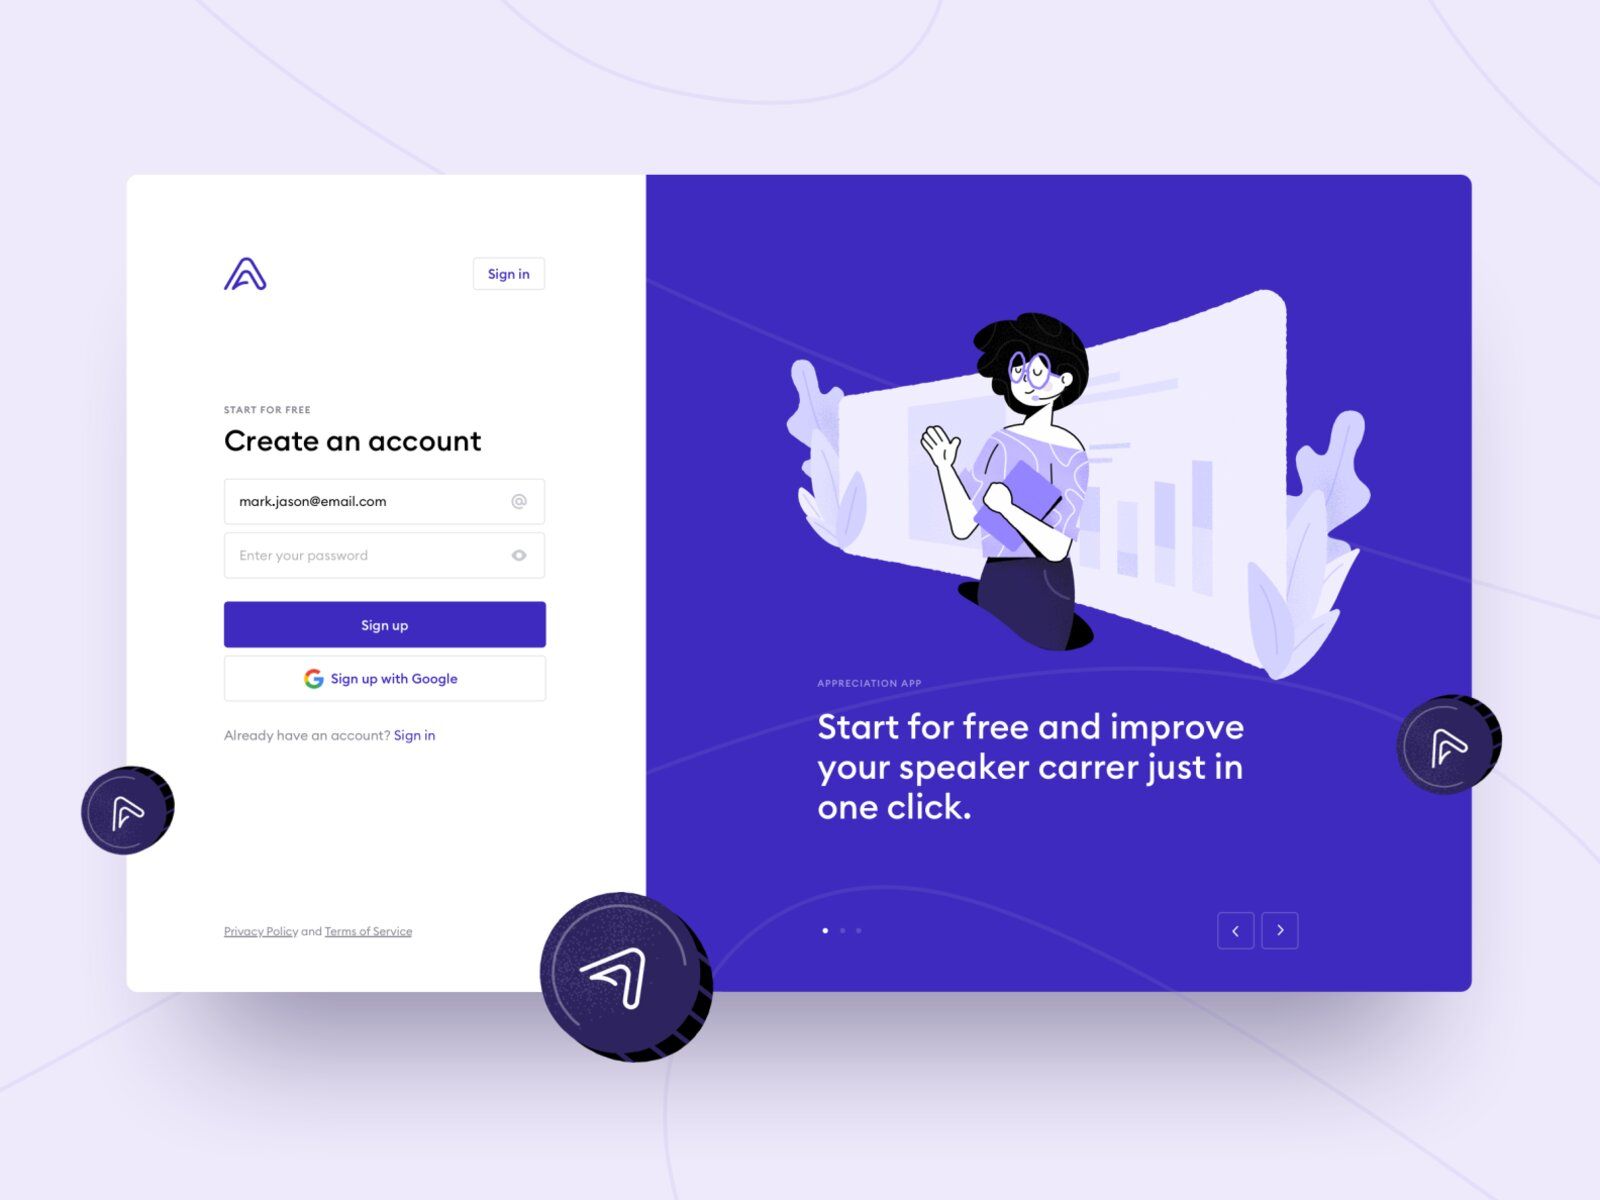 A simple Sign Up for a successful marketplace design (*image by [Dawid Pietrasiak](https://dribbble.com/dawidpietrasiak){ rel="nofollow" target="_blank" .default-md}*)